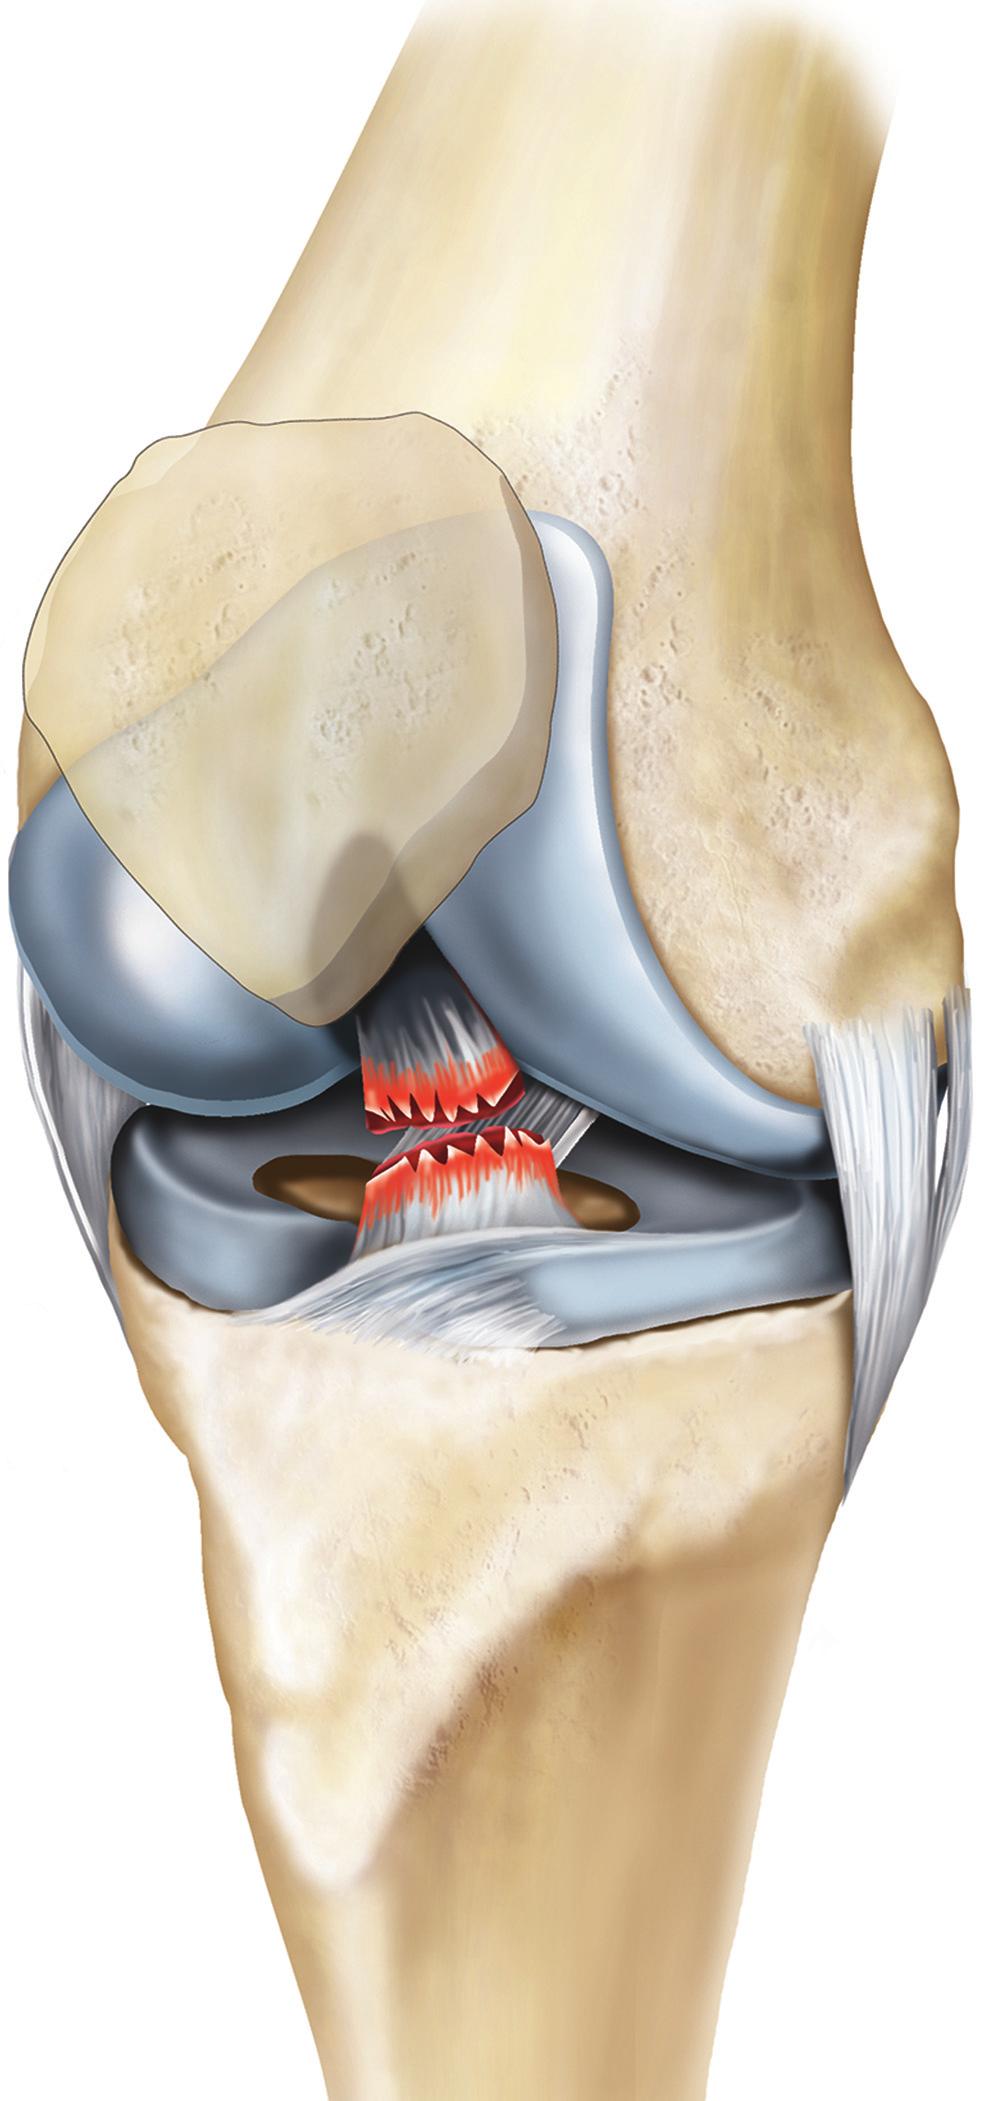 What is the anterior cruciate ligament? The anterior cruciate ligament (ACL) is one of the important ligaments that stabilise your knee.